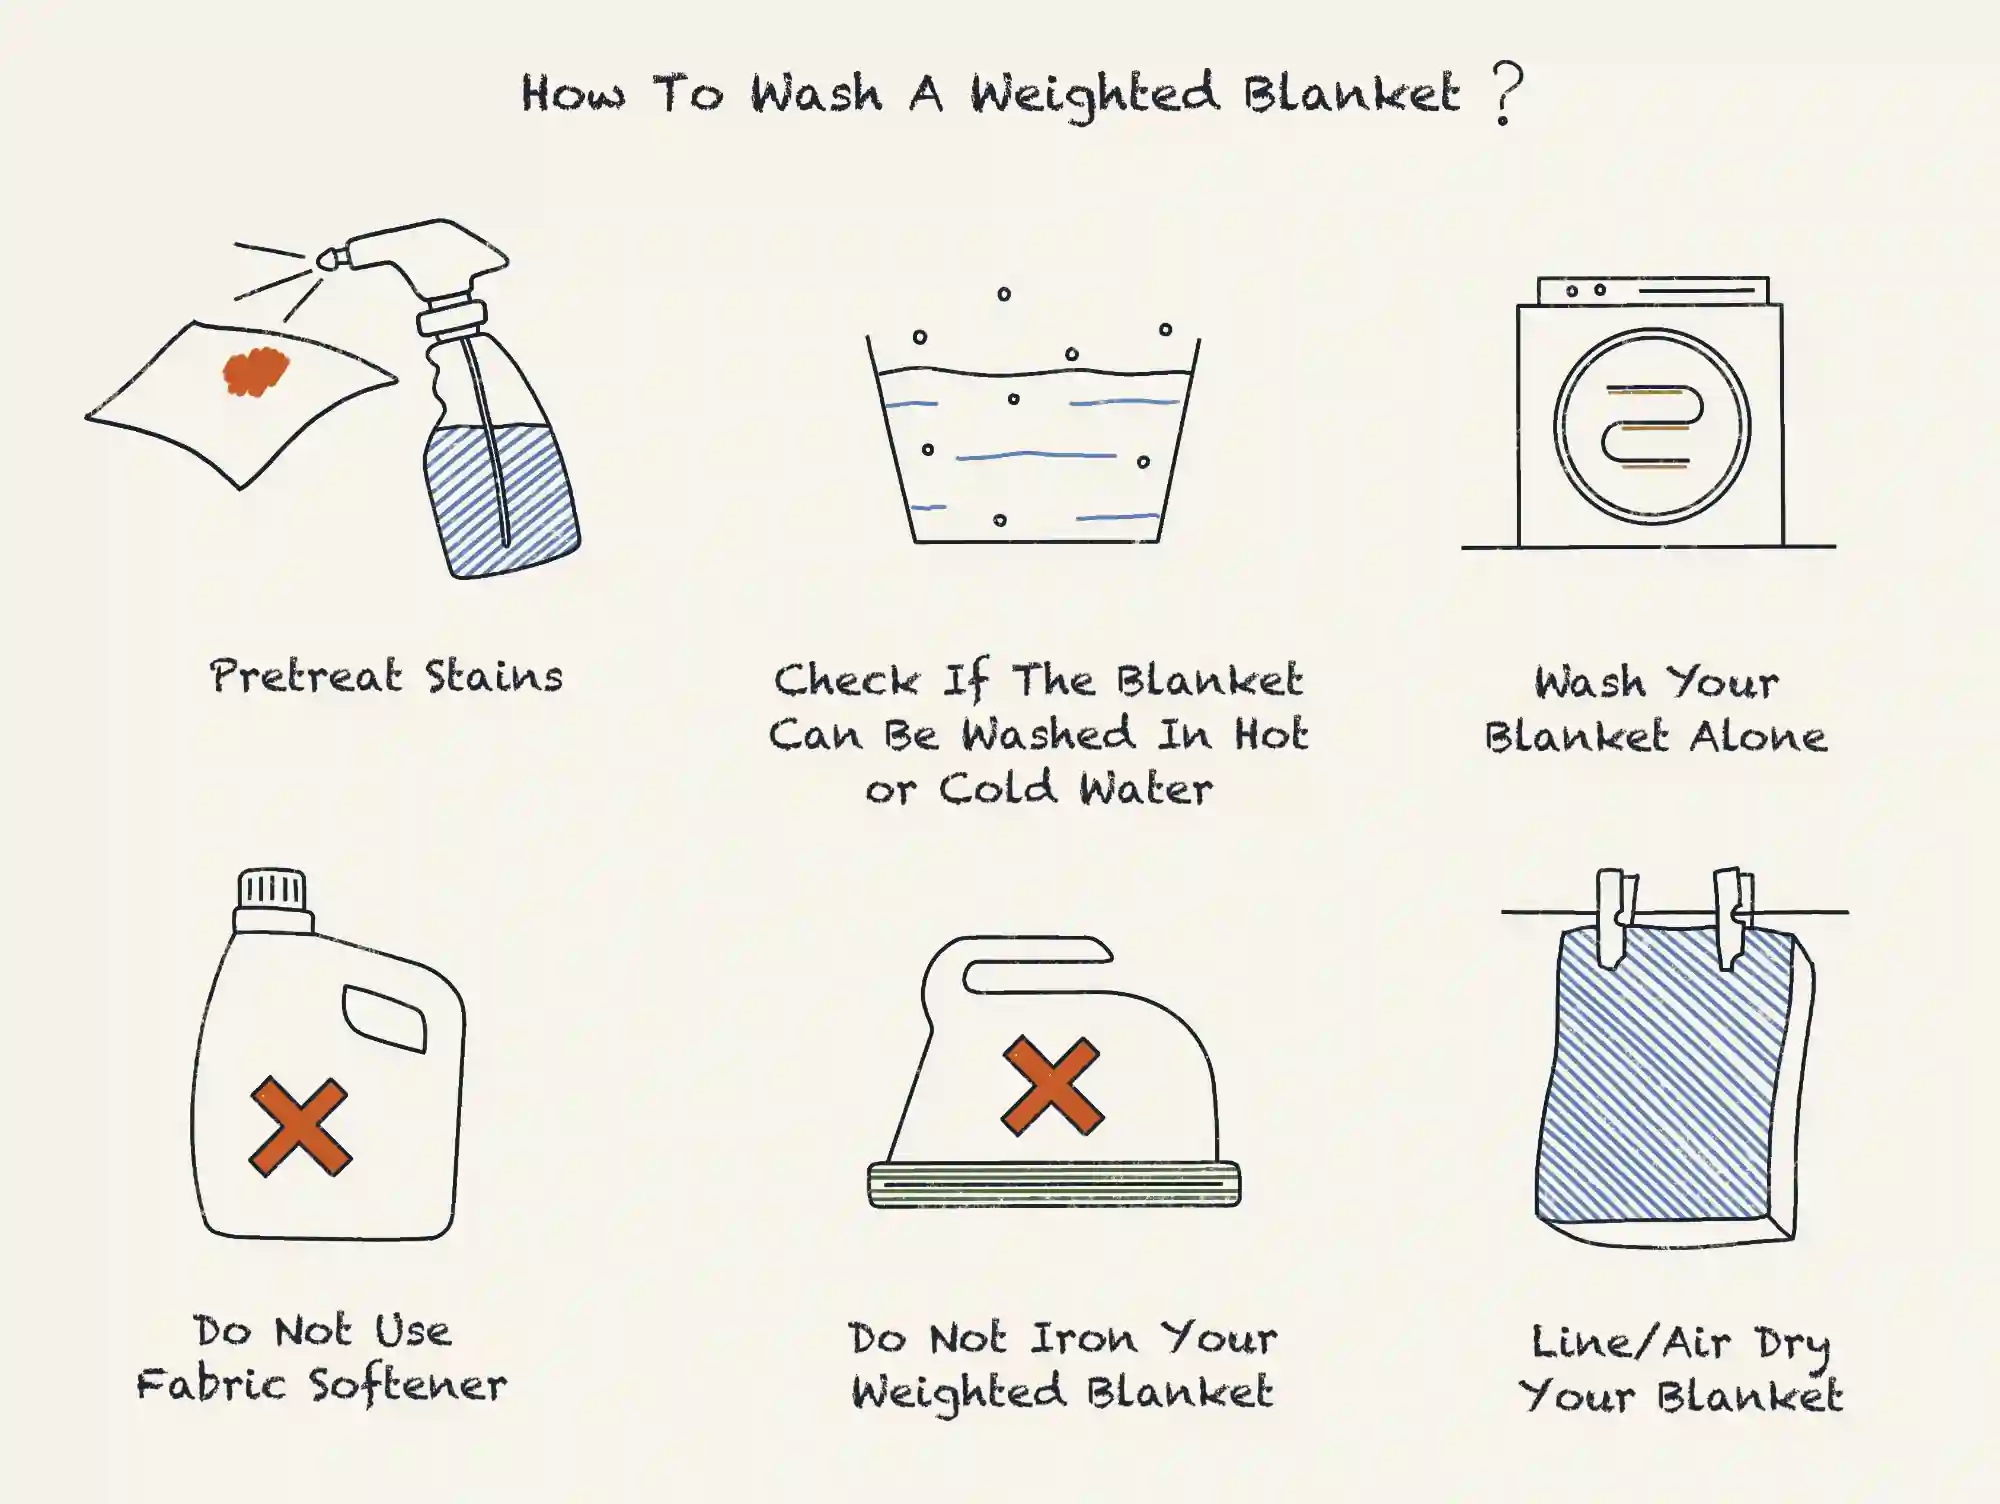 Illustration of How to Wash a Weighted Blanket